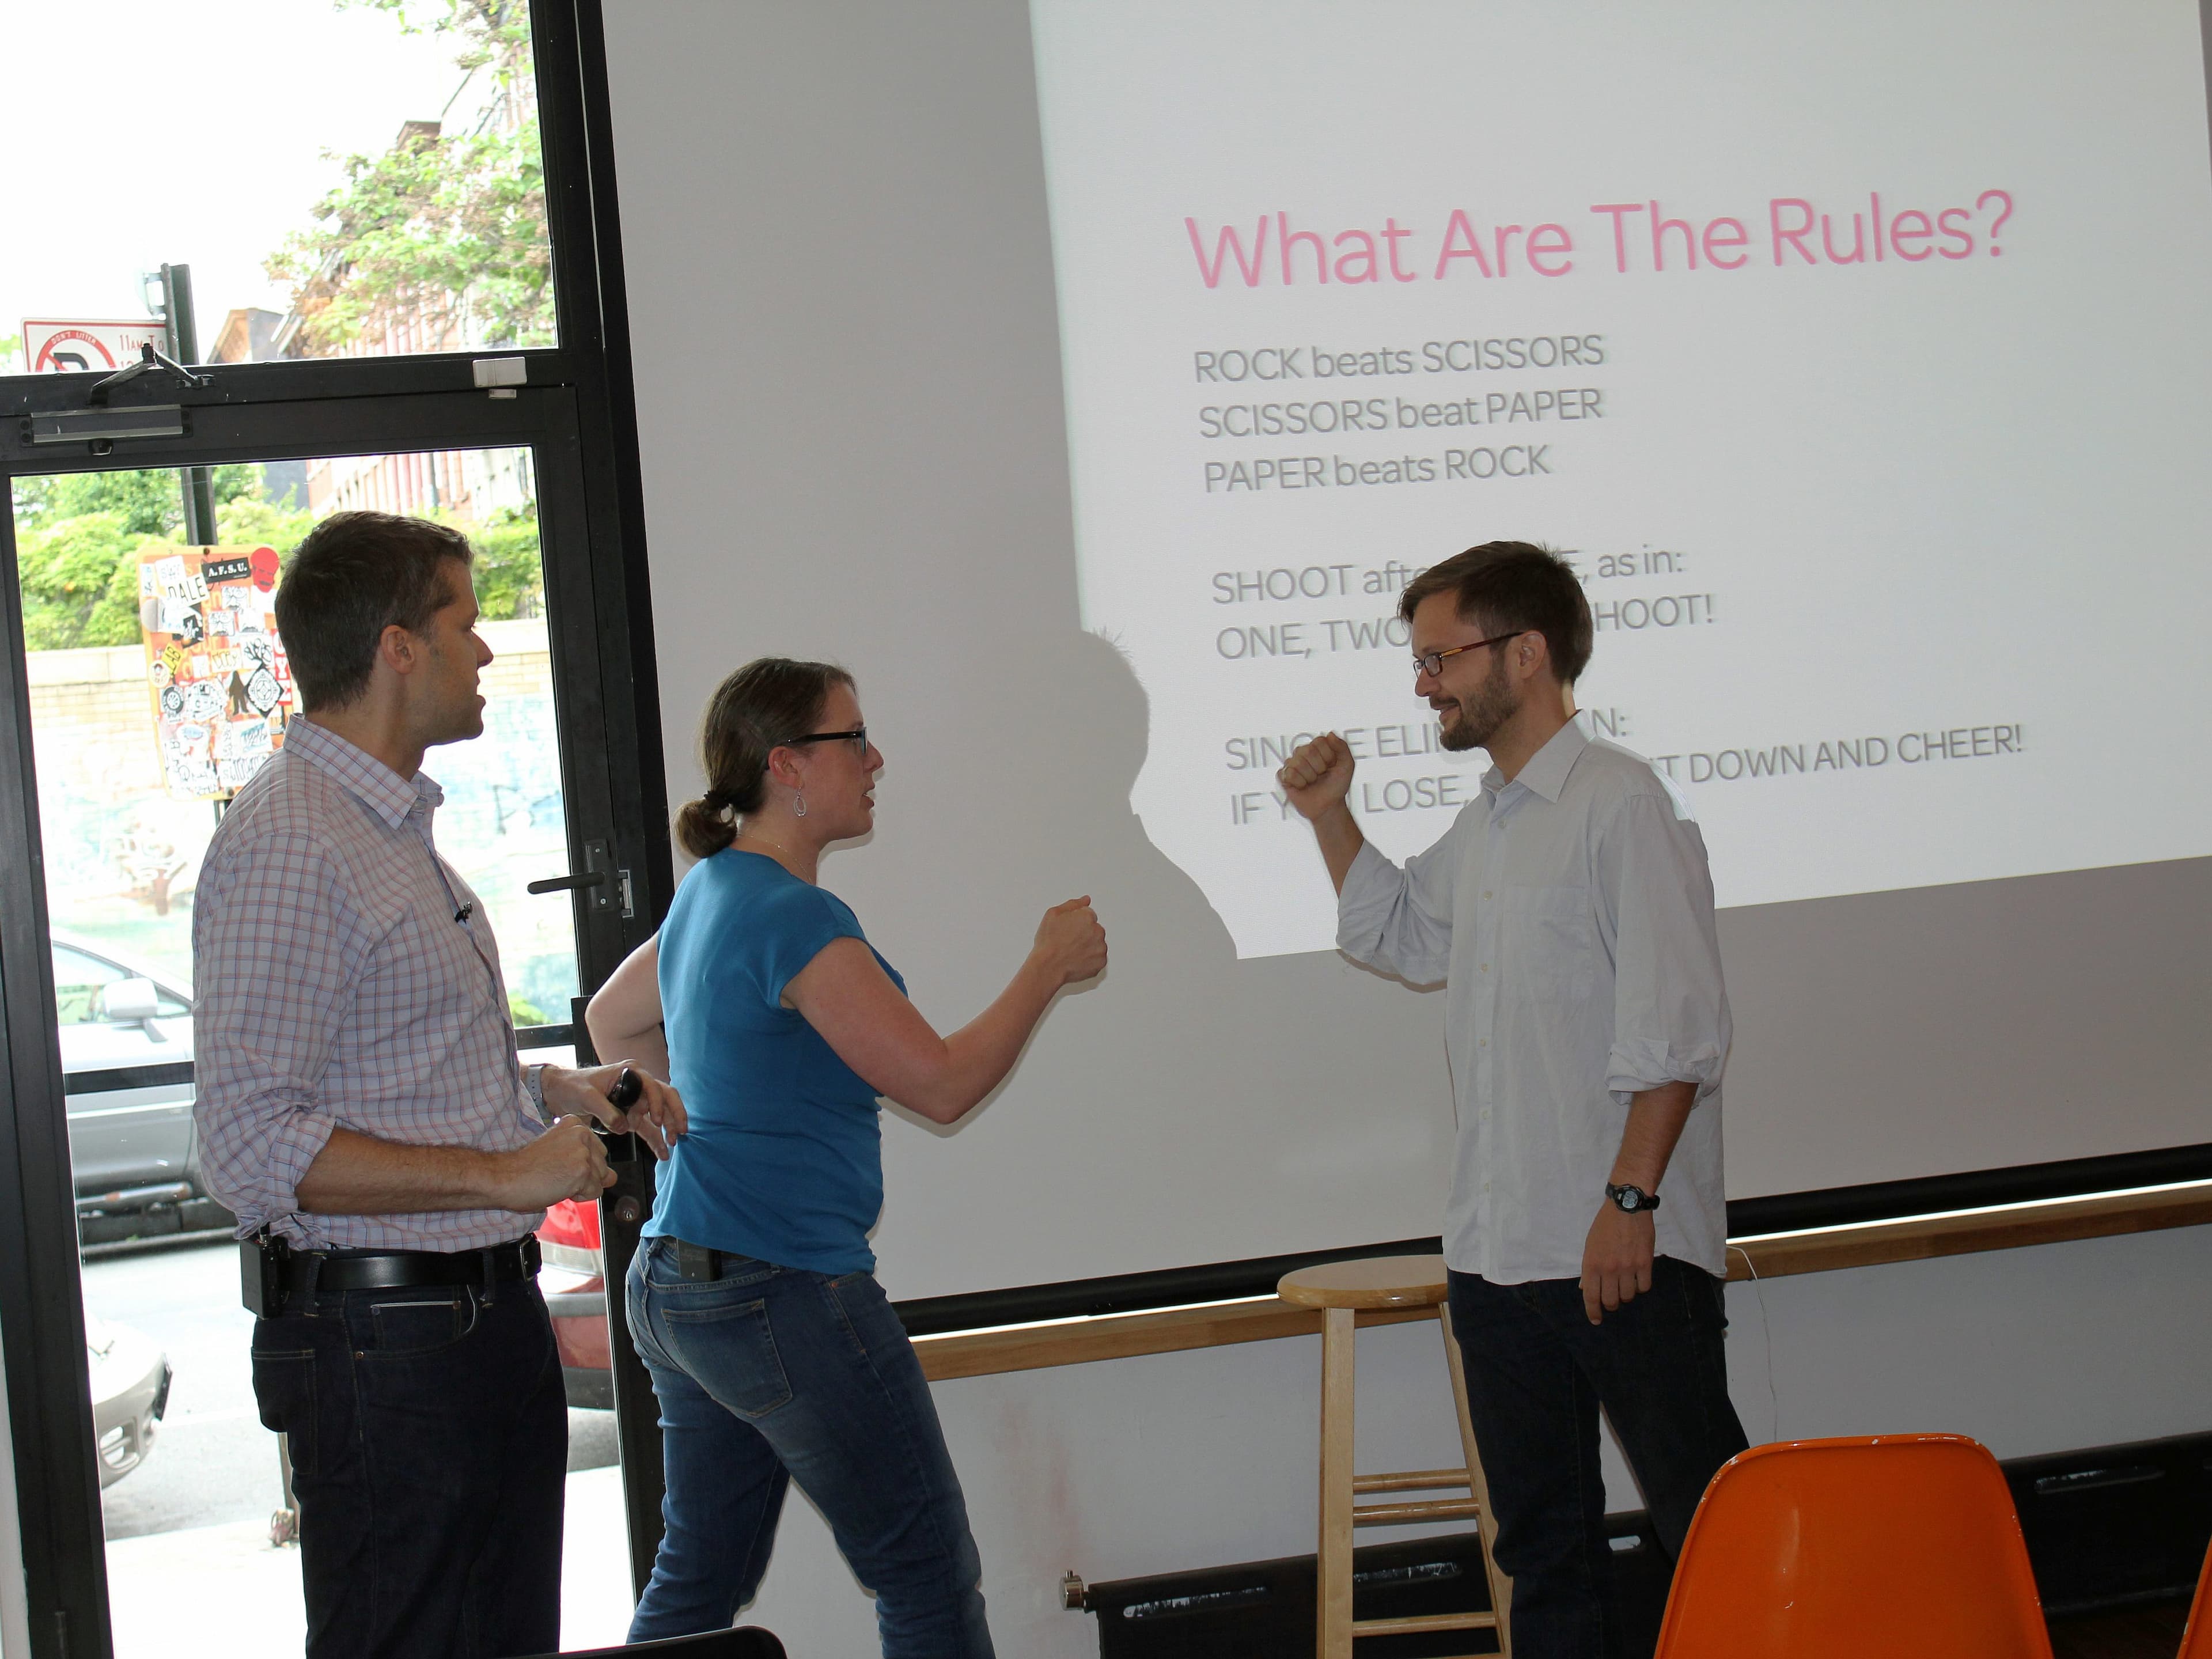 Three individuals are engaged in a rock-paper-scissors game in front of a projected screen displaying the rules. One person is holding a microphone, while the other two are poised to play. Orange chairs are visible in the foreground.